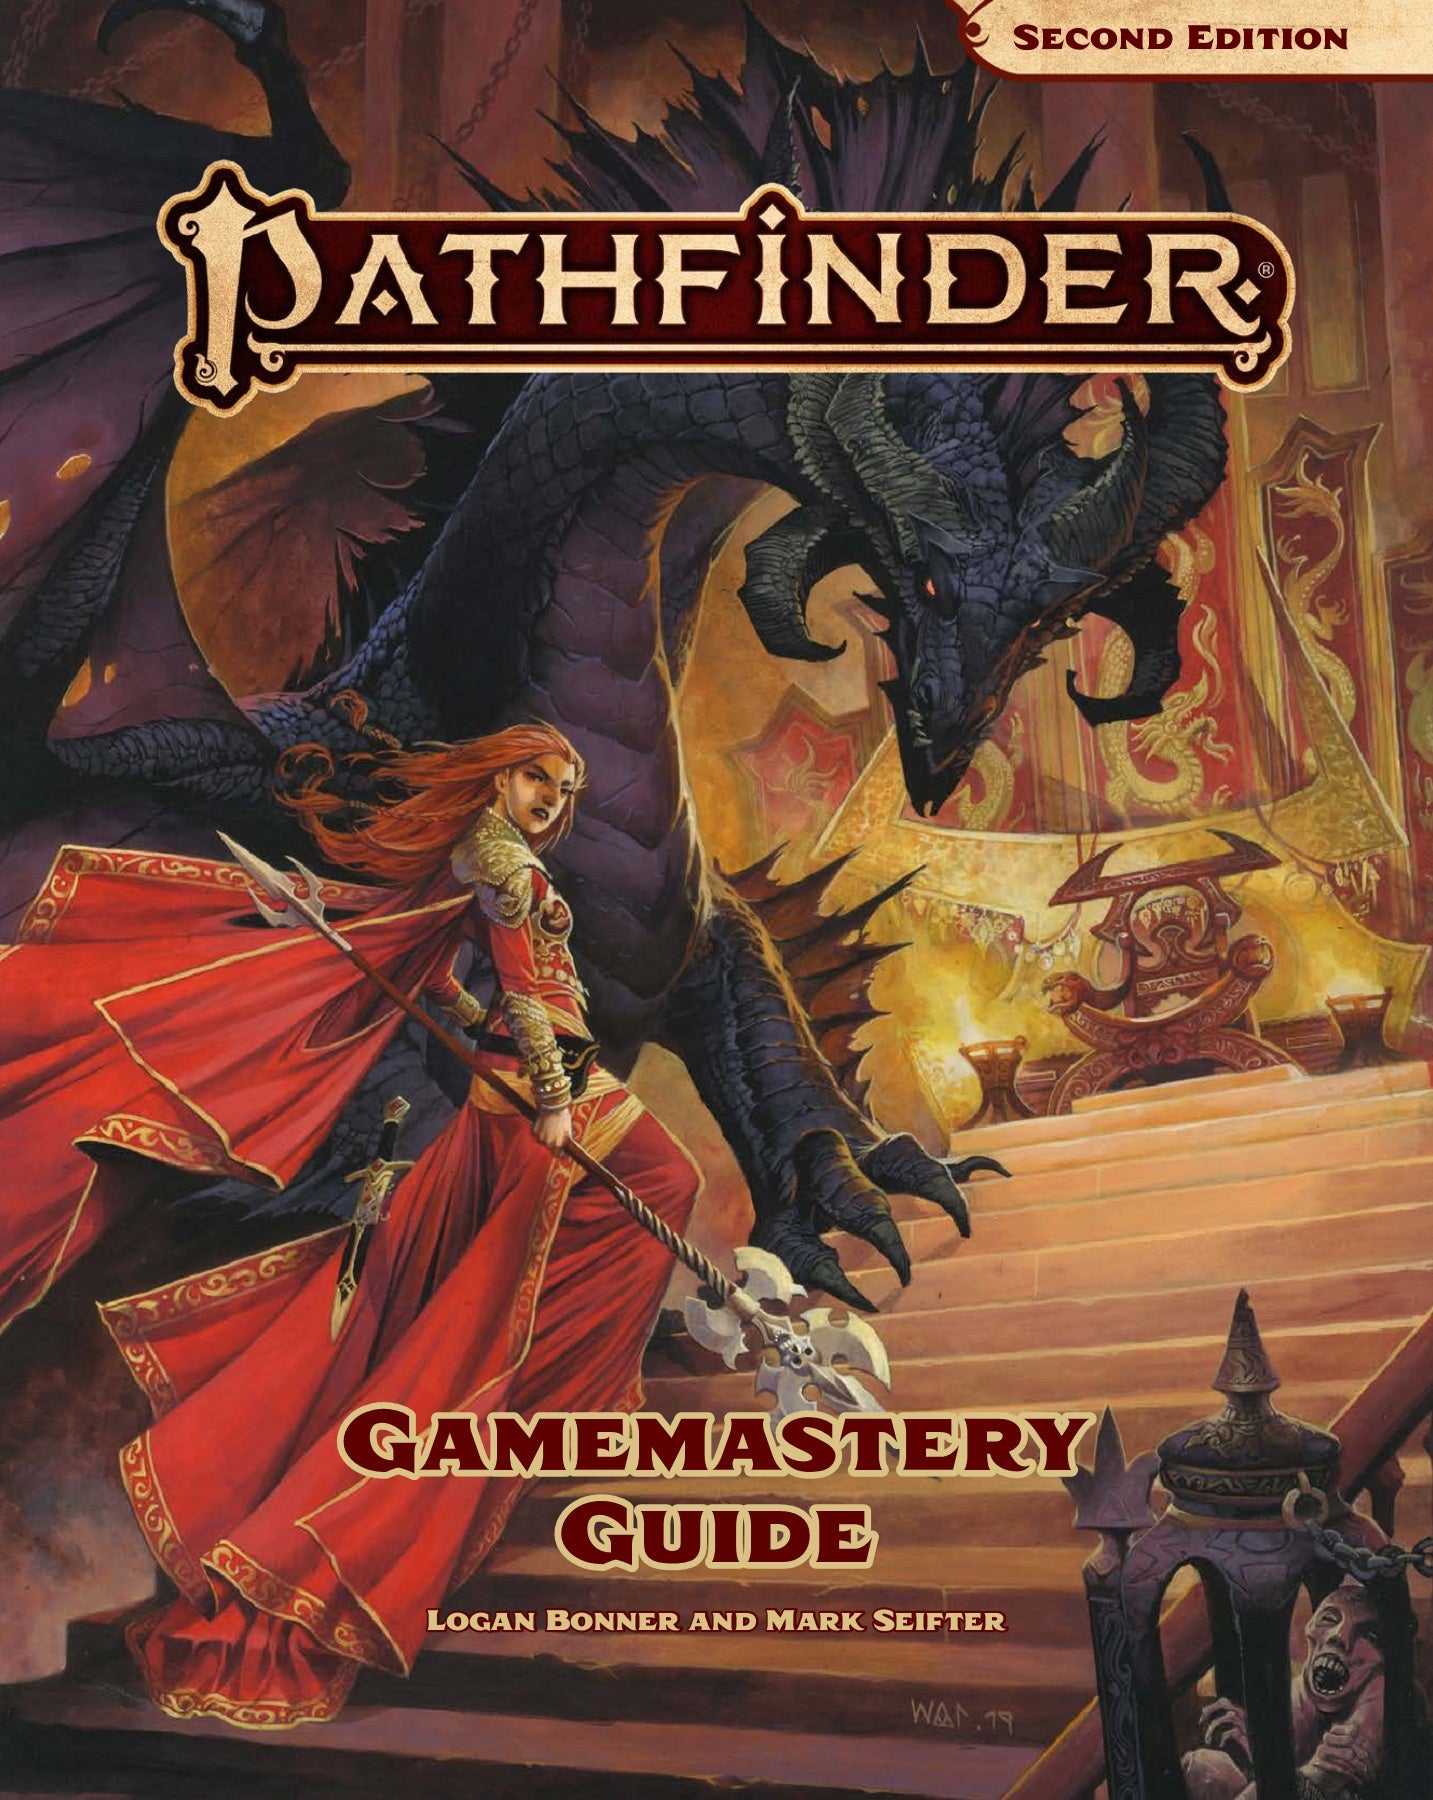 Gamemastery Guide - Pathfinder Second Edition (2E) RPG